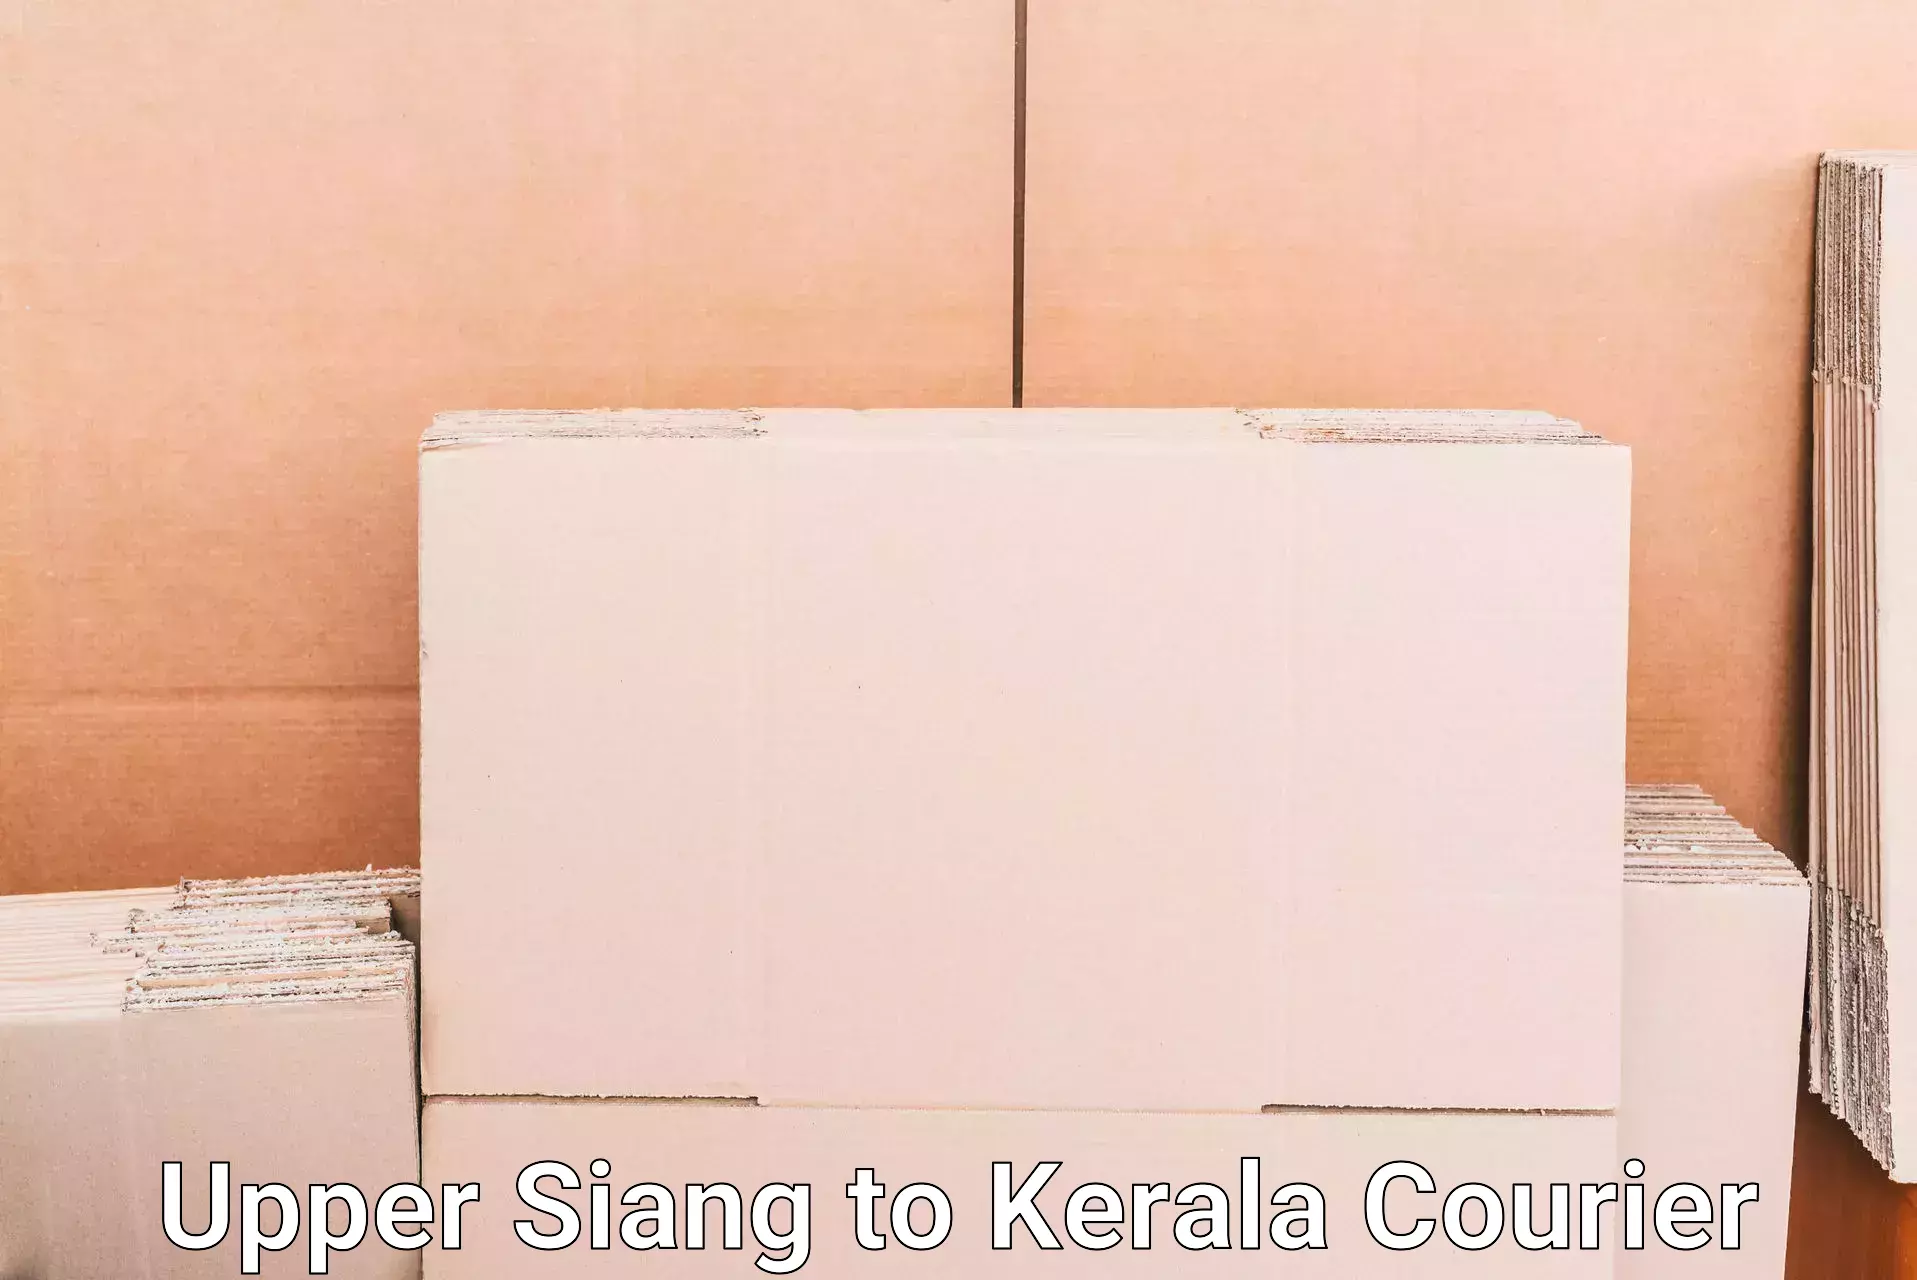 Luggage transport company Upper Siang to Kalpetta